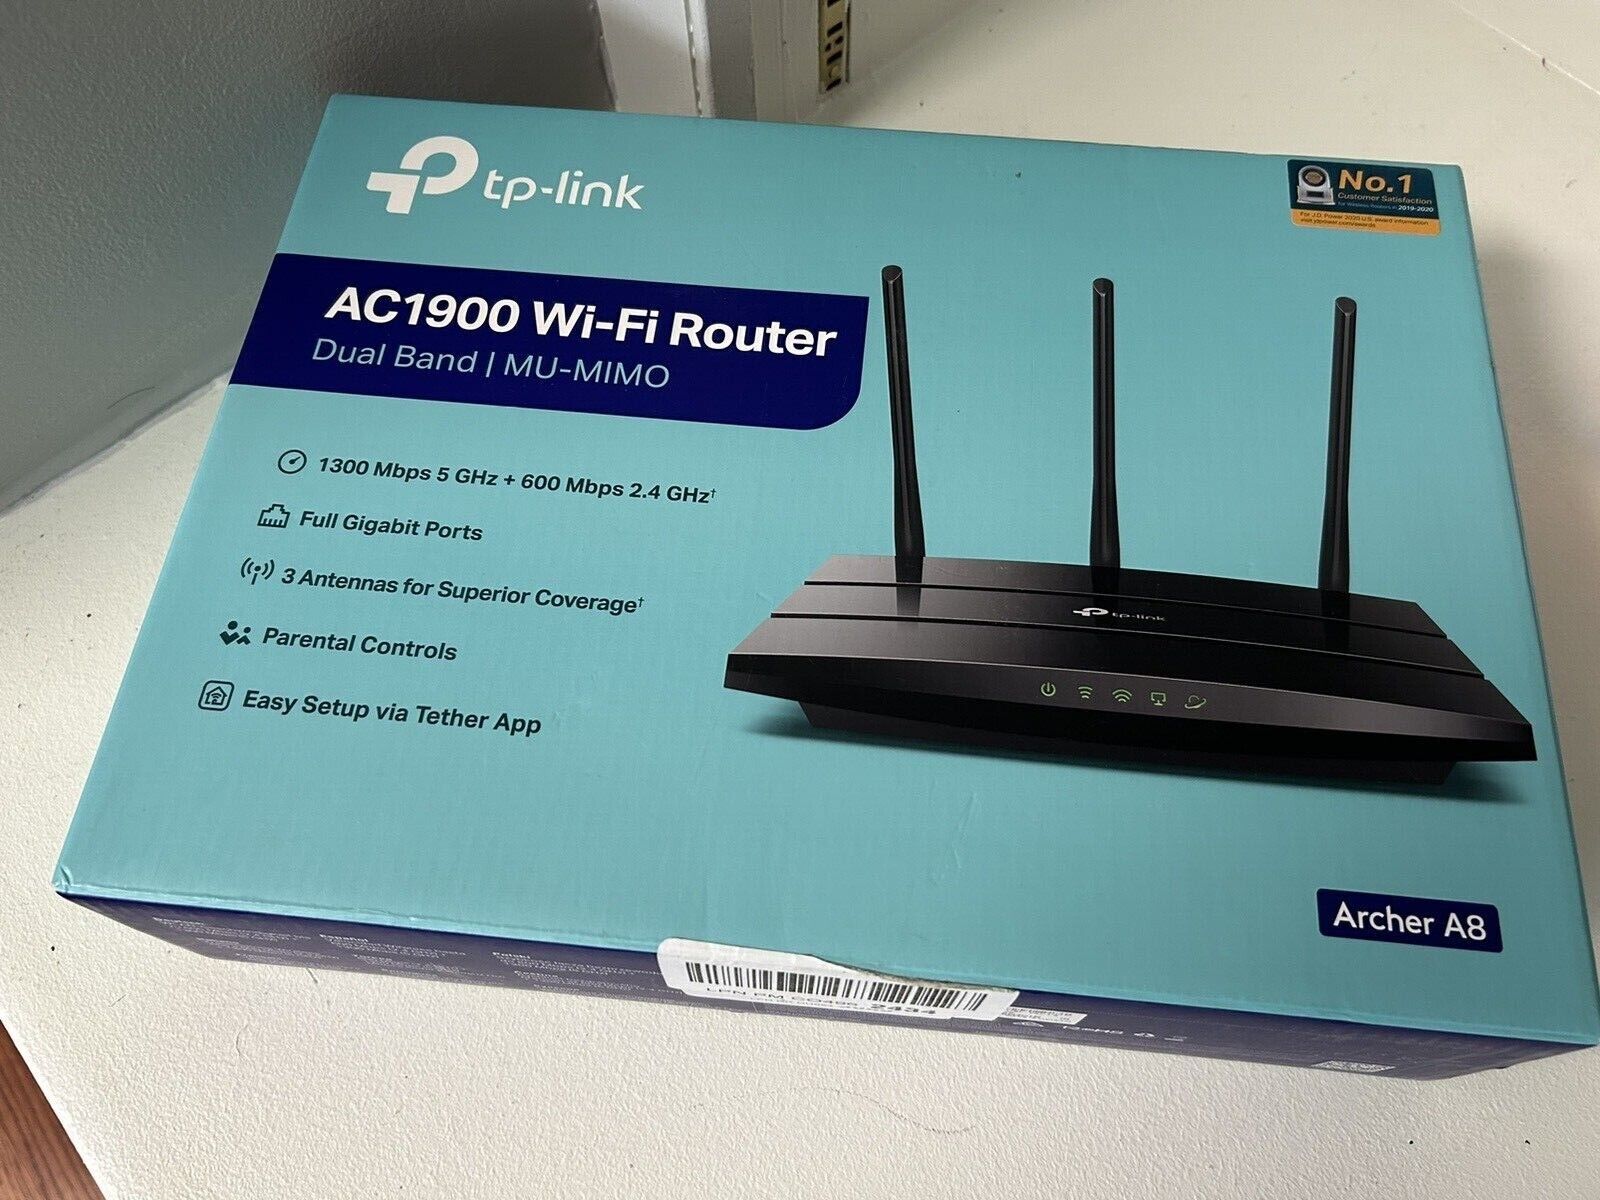 TP-LINK AC1900 Wi-Fi Router Dual Band Mu-Mimo WiFi Archer A8- Brand New